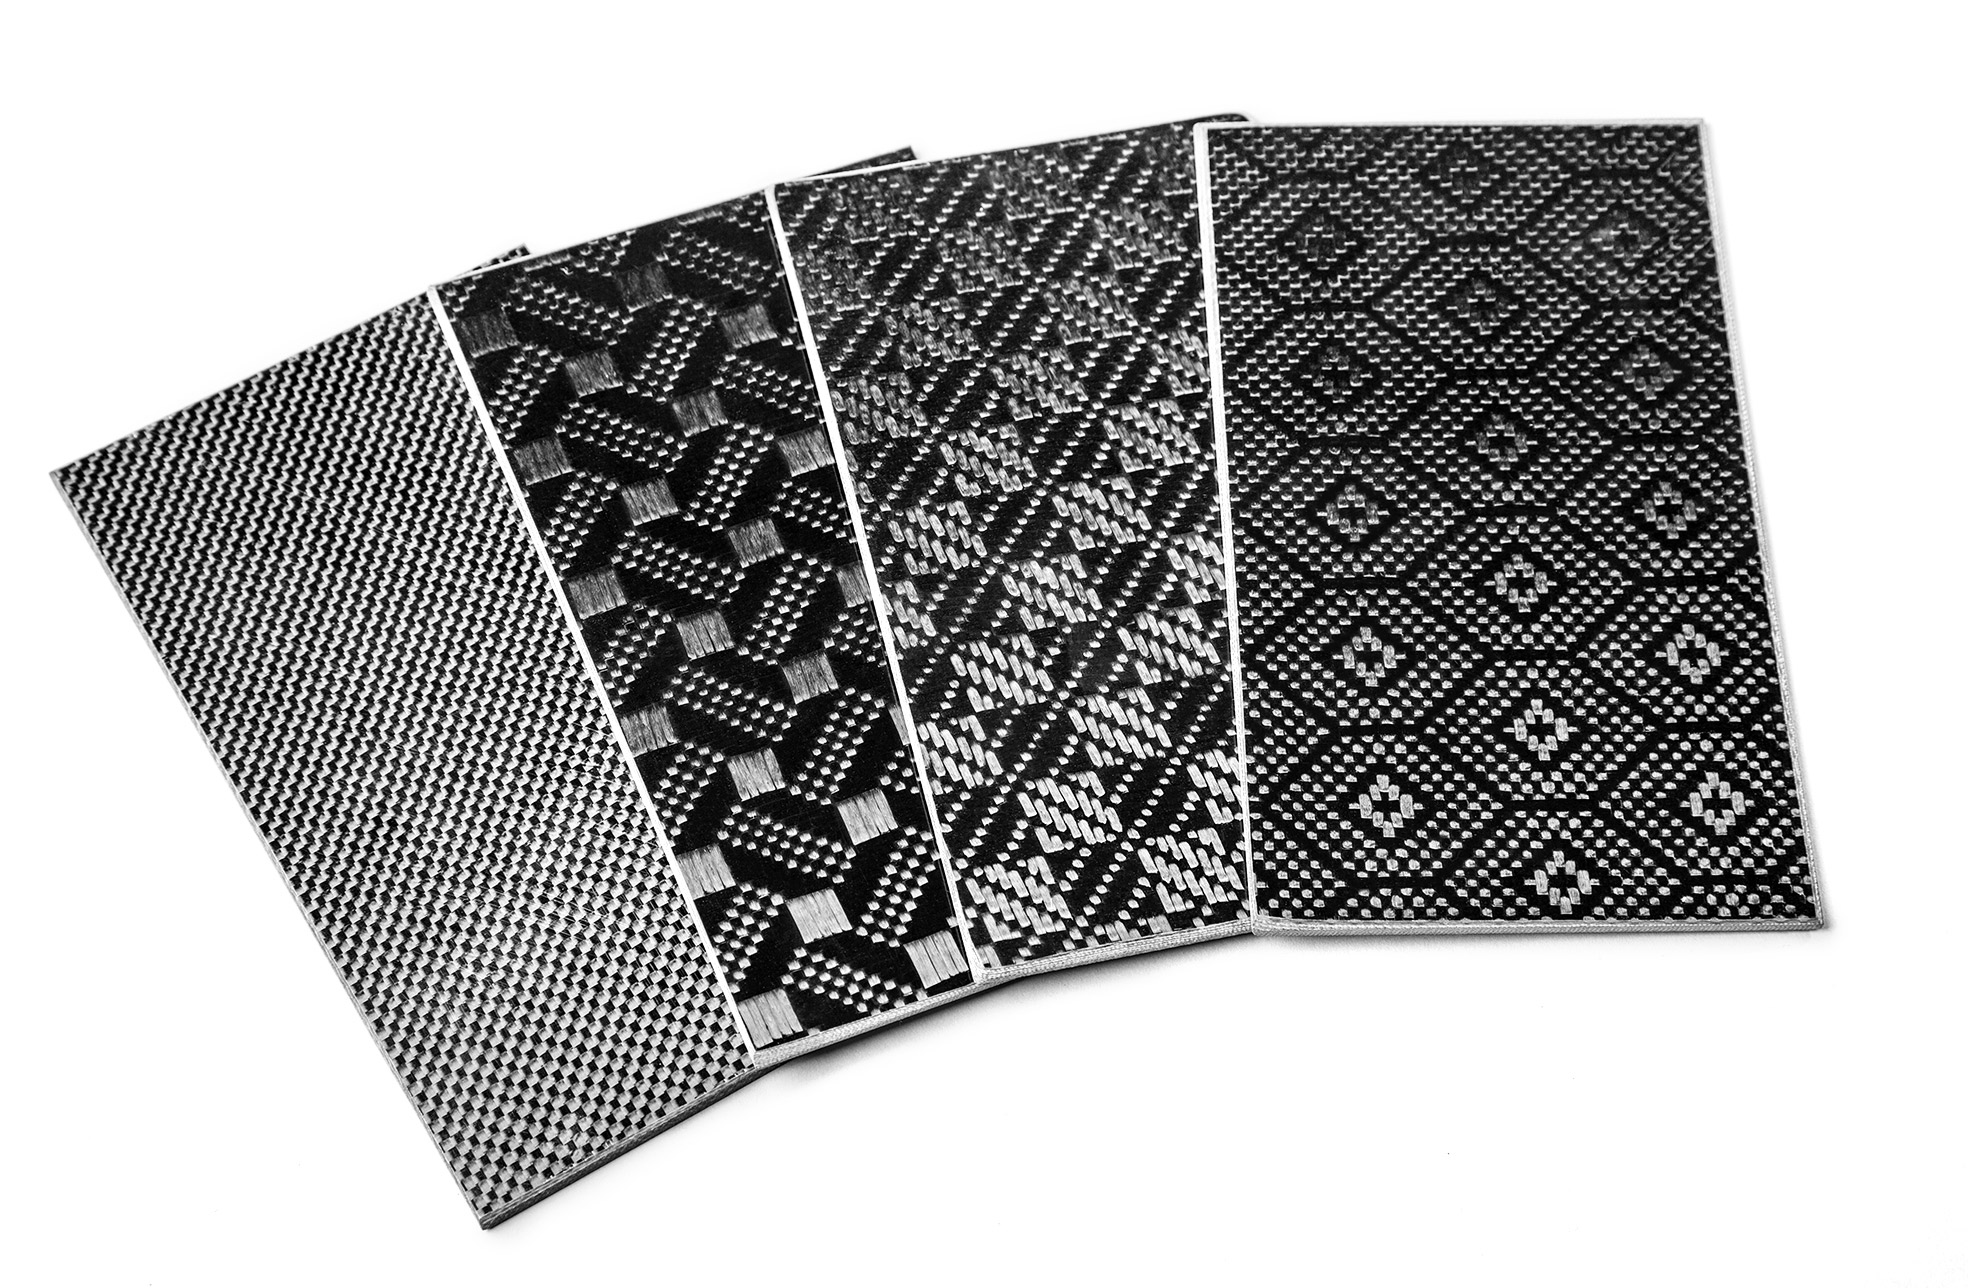 Group of 4 geometrical Carbon Fiber Sheets